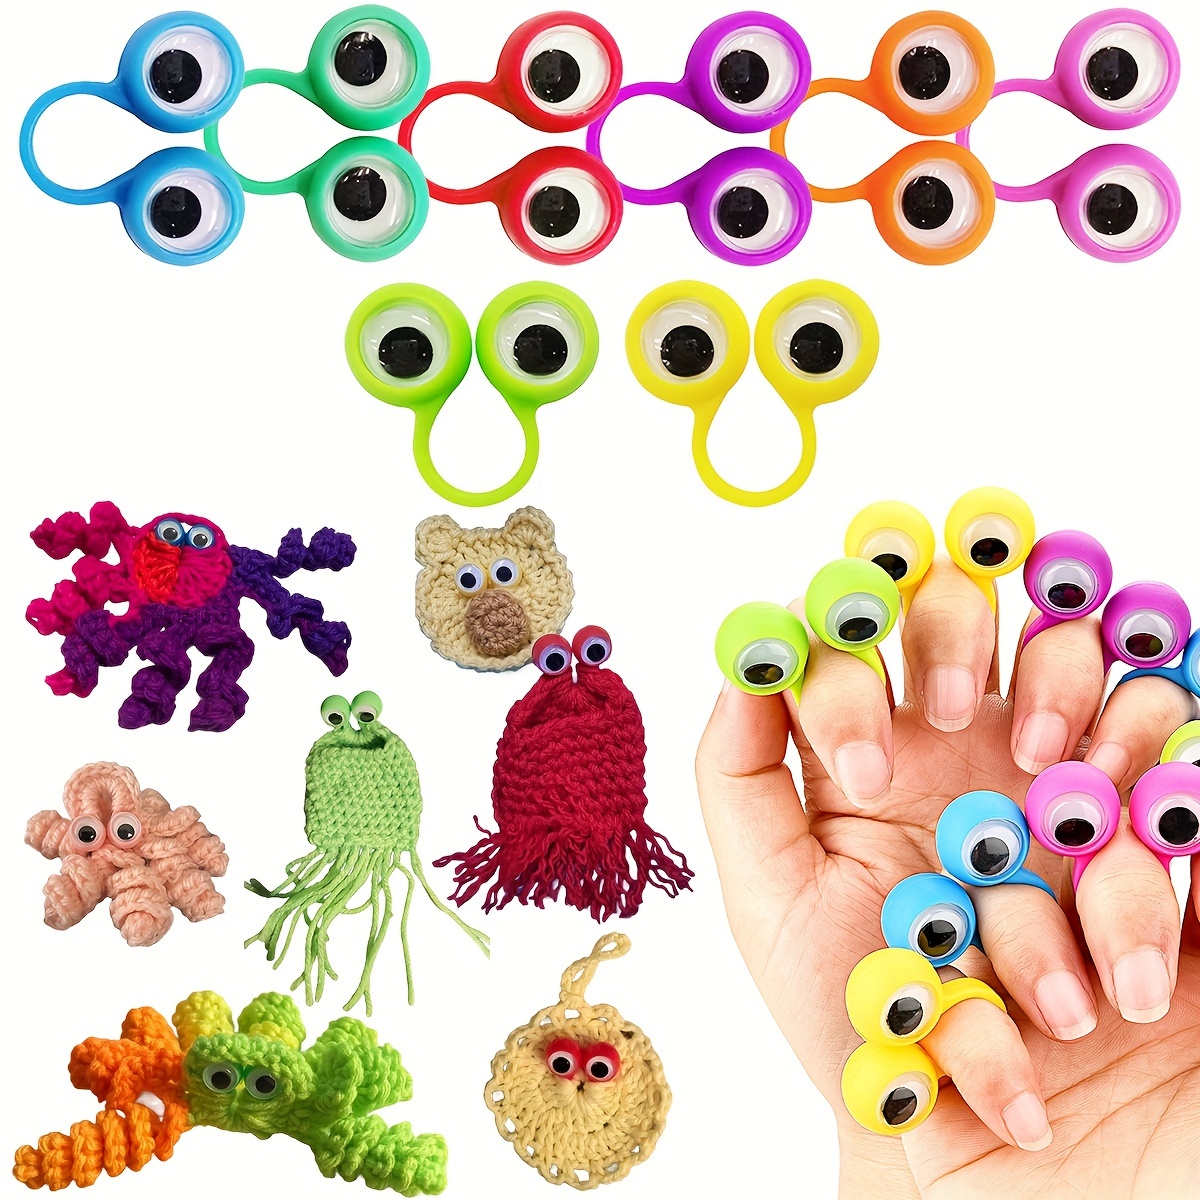 Safety Eyes and Noses, 172Pcs Large Safety Eyes for Amigurumi with Washers  for Crochet/Dolls/Stuffed Animal(Black)